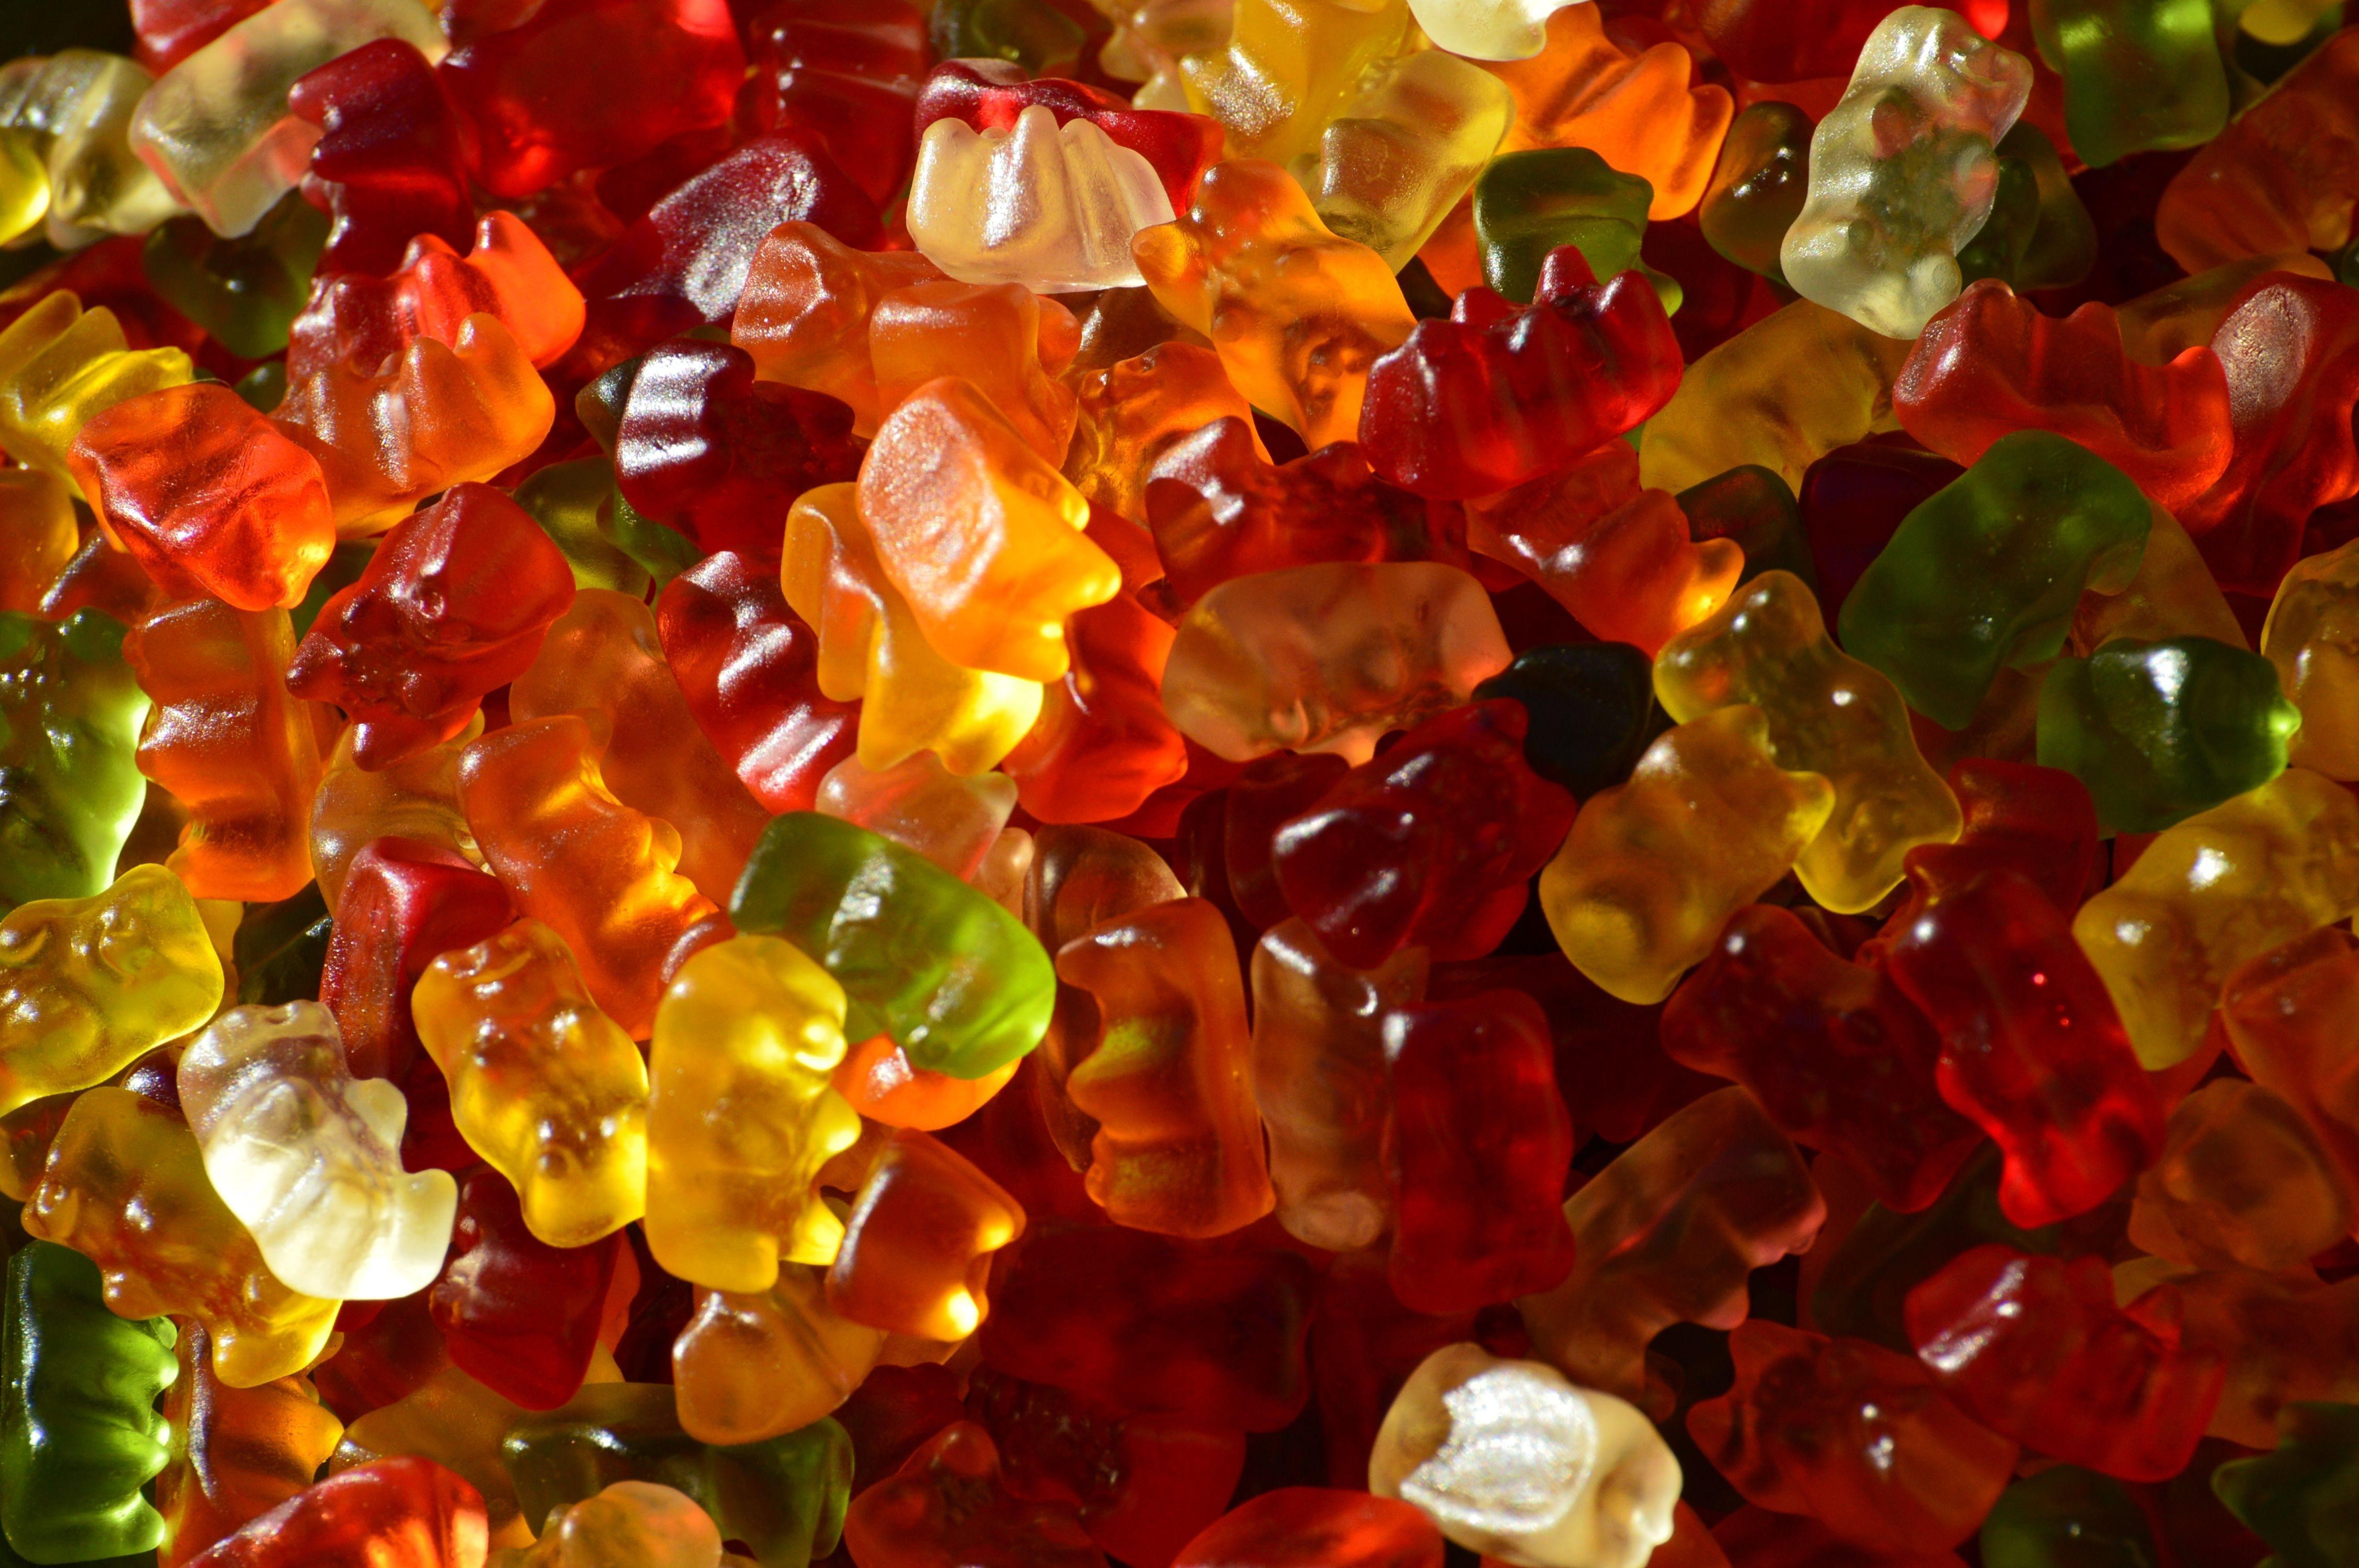 bear jelly candies free image